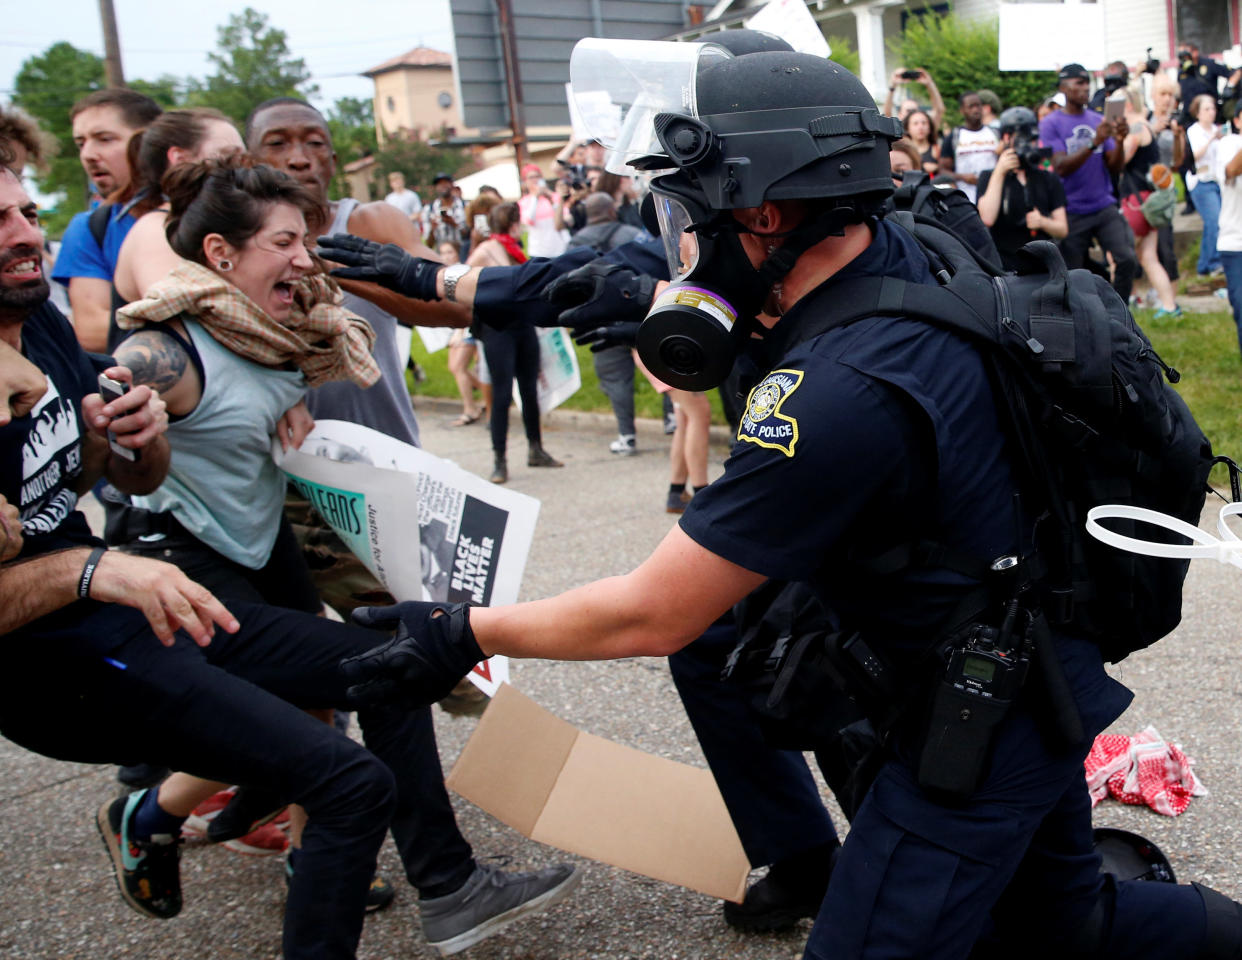 Demonstrators scuffle with police during protests in Baton Rouge, Louisiana, U.S., July 10, 2016.  REUTERS/Shannon Stapleton